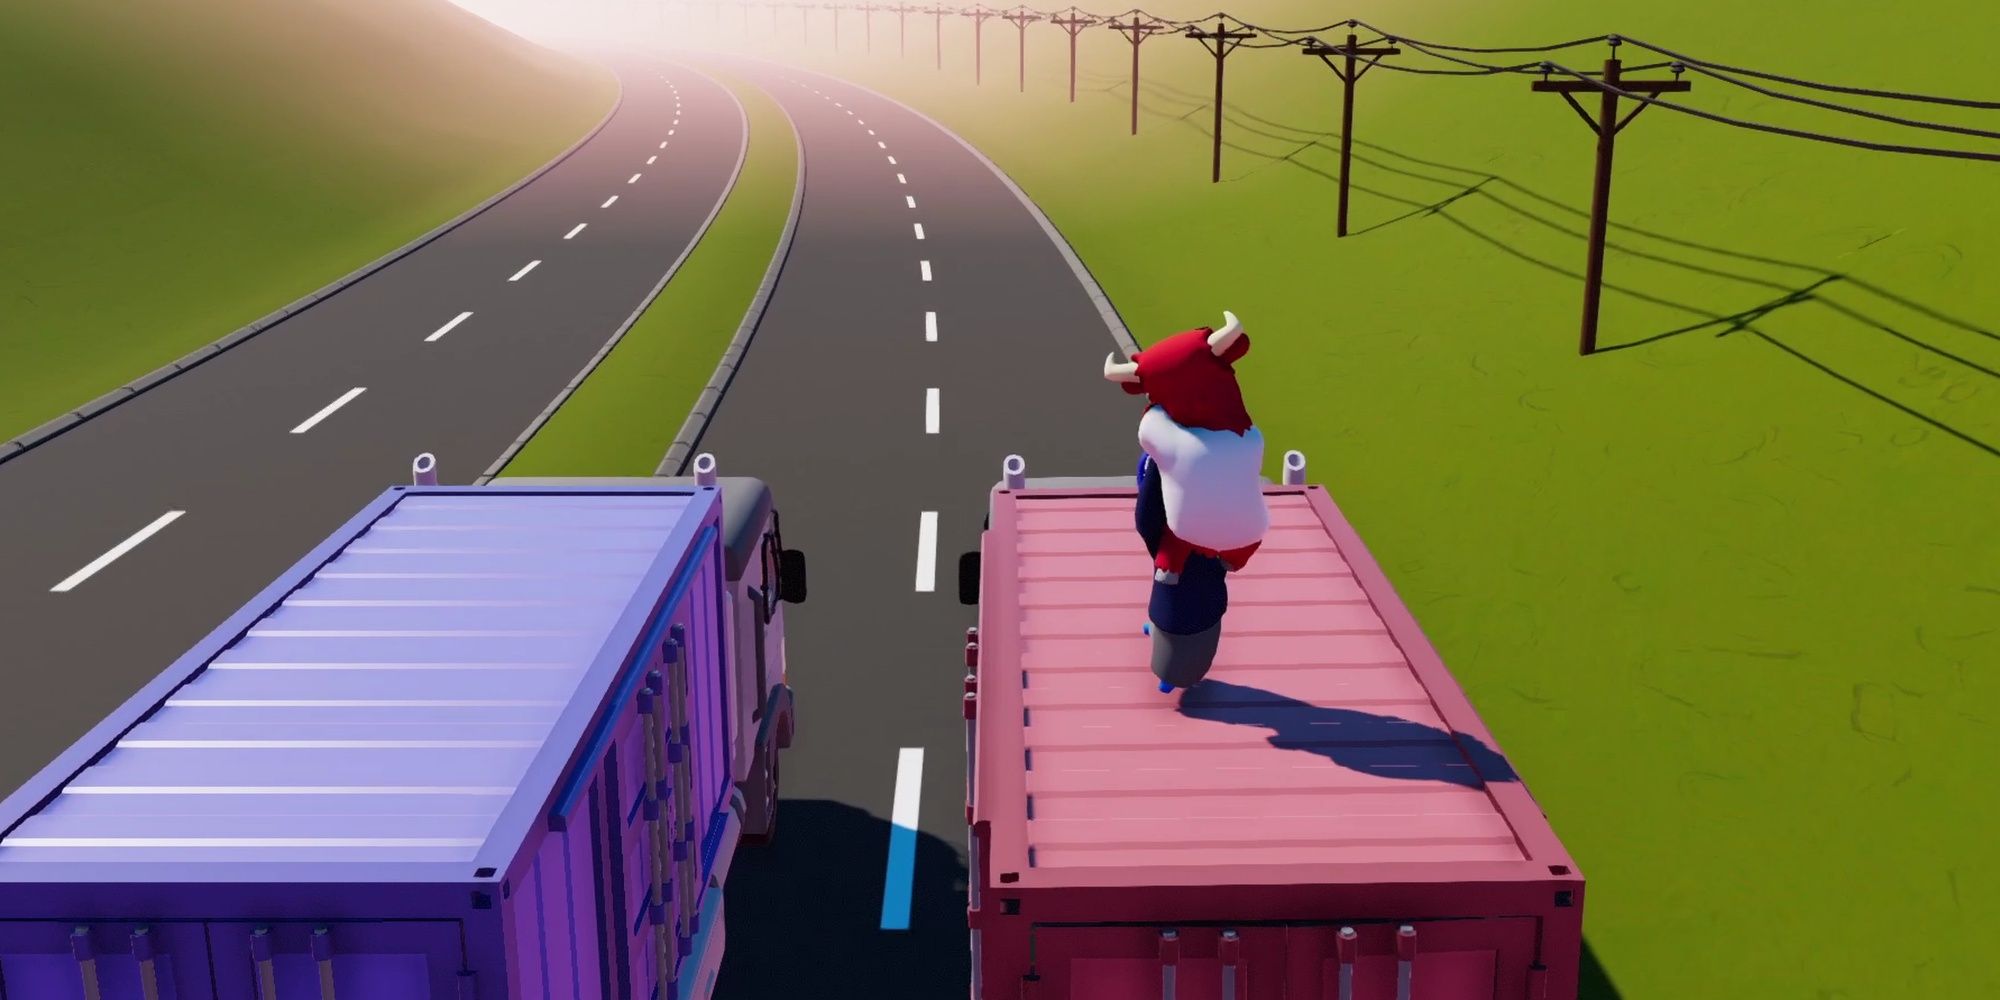 Gang Beasts: Smaller Character Holding Larger Costumed Character In Chokehold